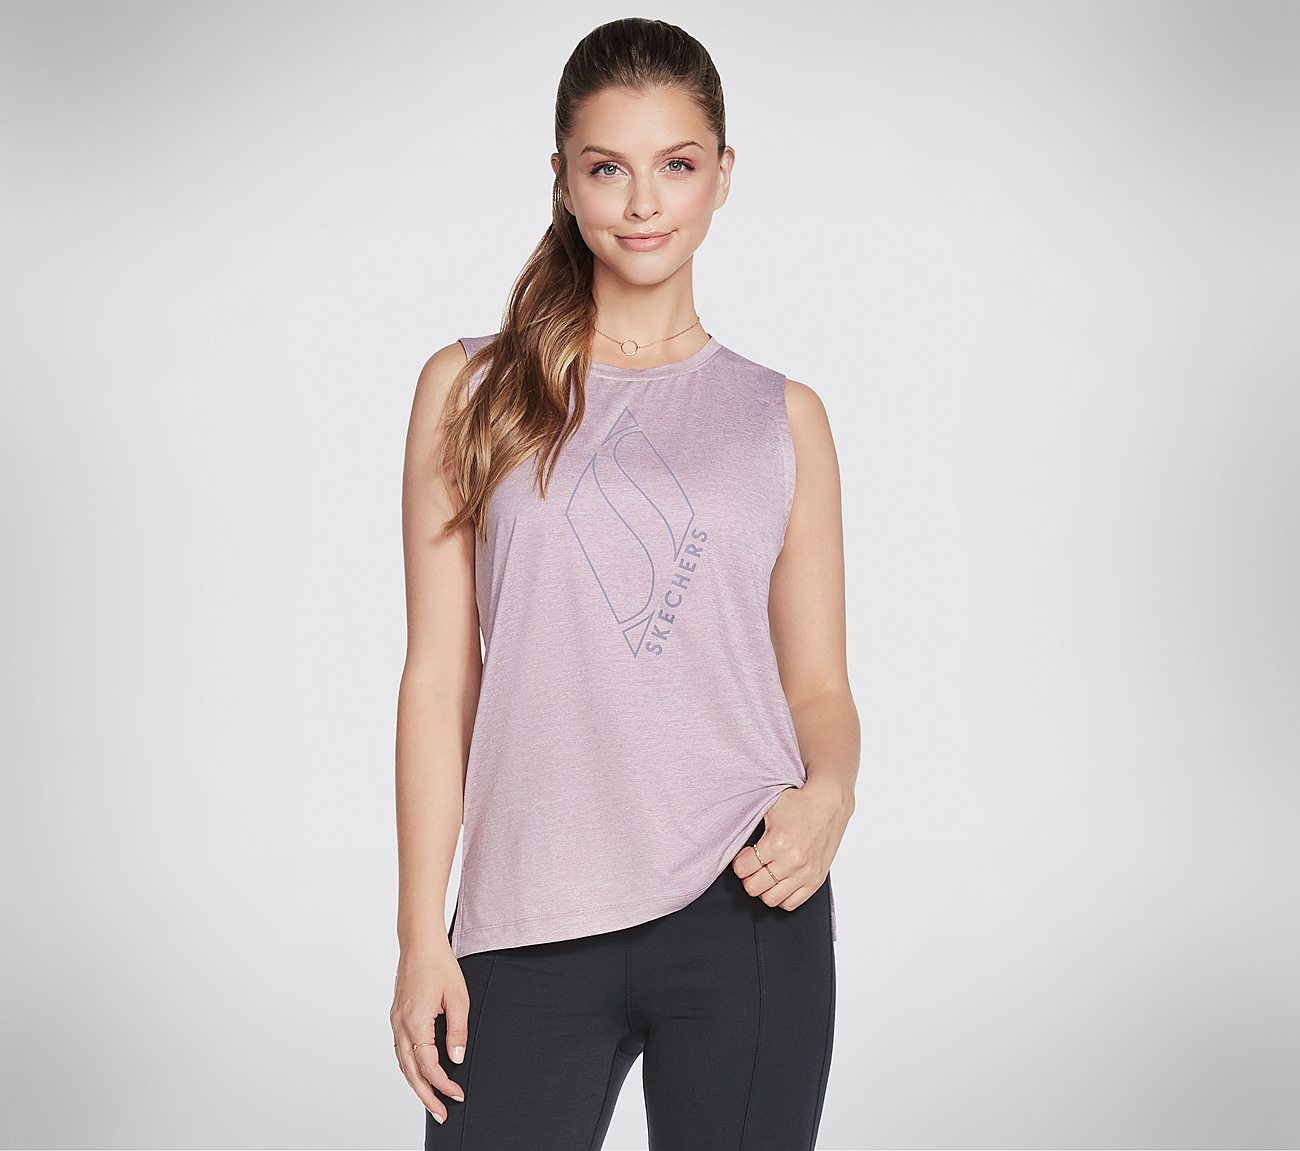 ON THE GO TANK, PURPLE/LAVENDER Apparels Lateral View